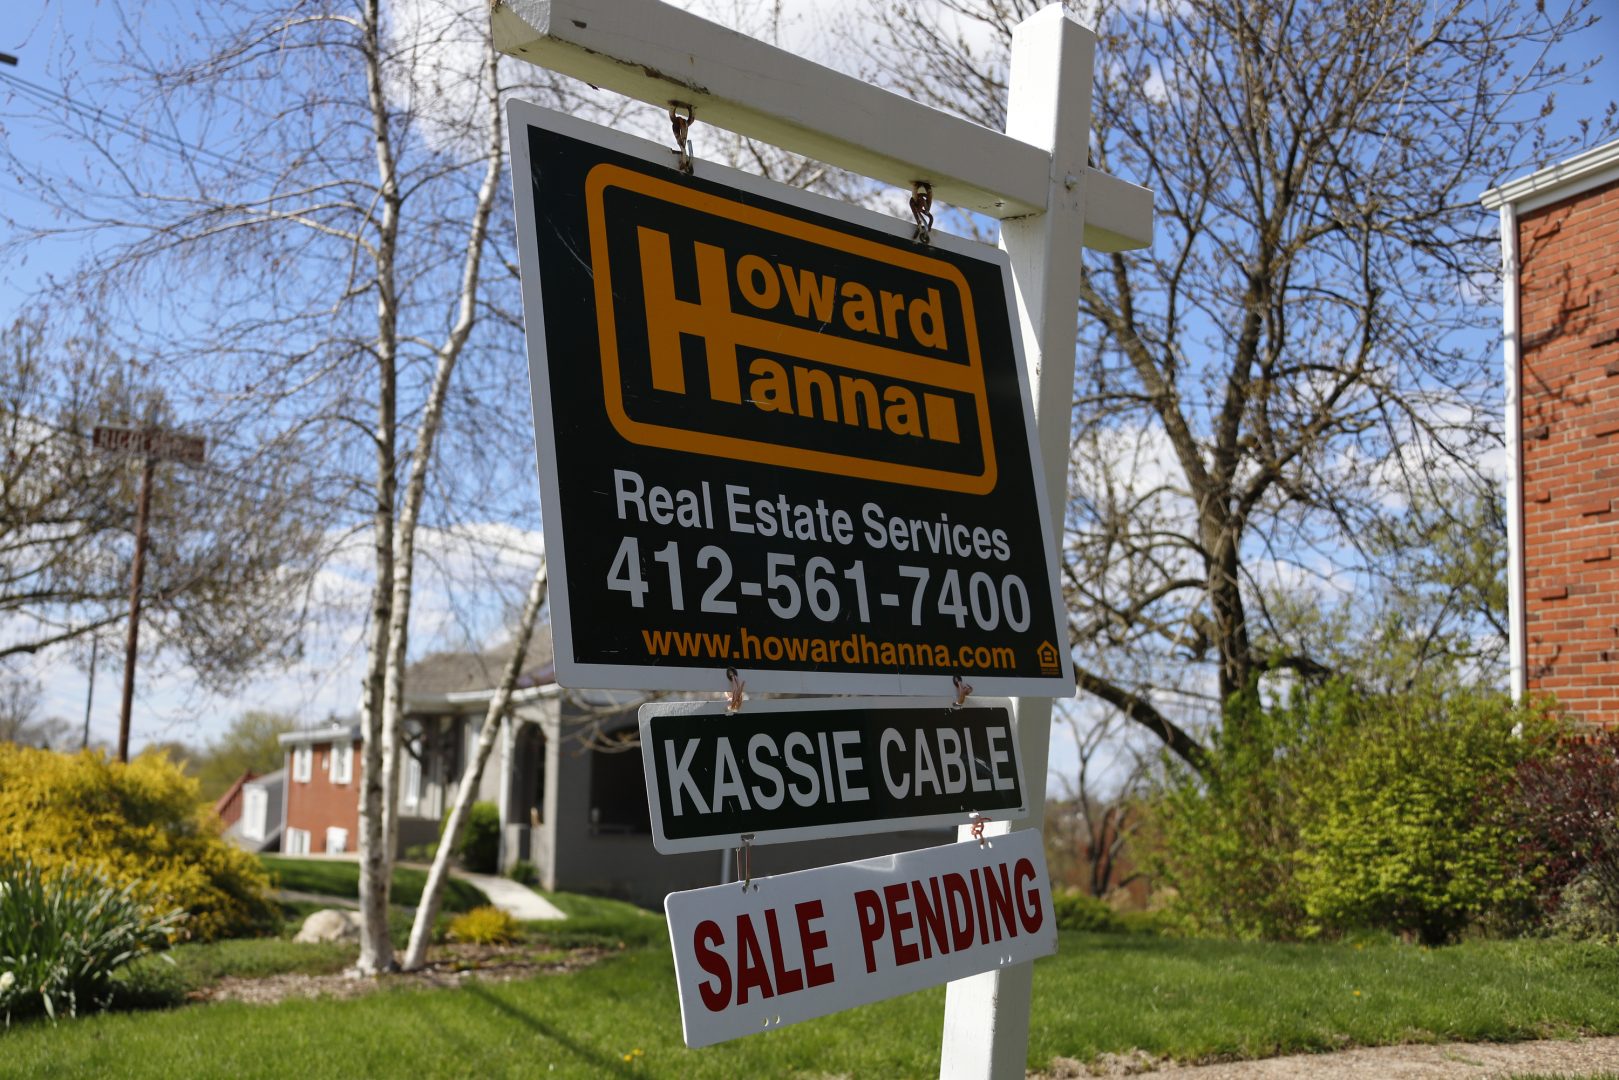 This is a sale pending sign on a home in Mount Lebanon, Pa., on April 27, 2020.  